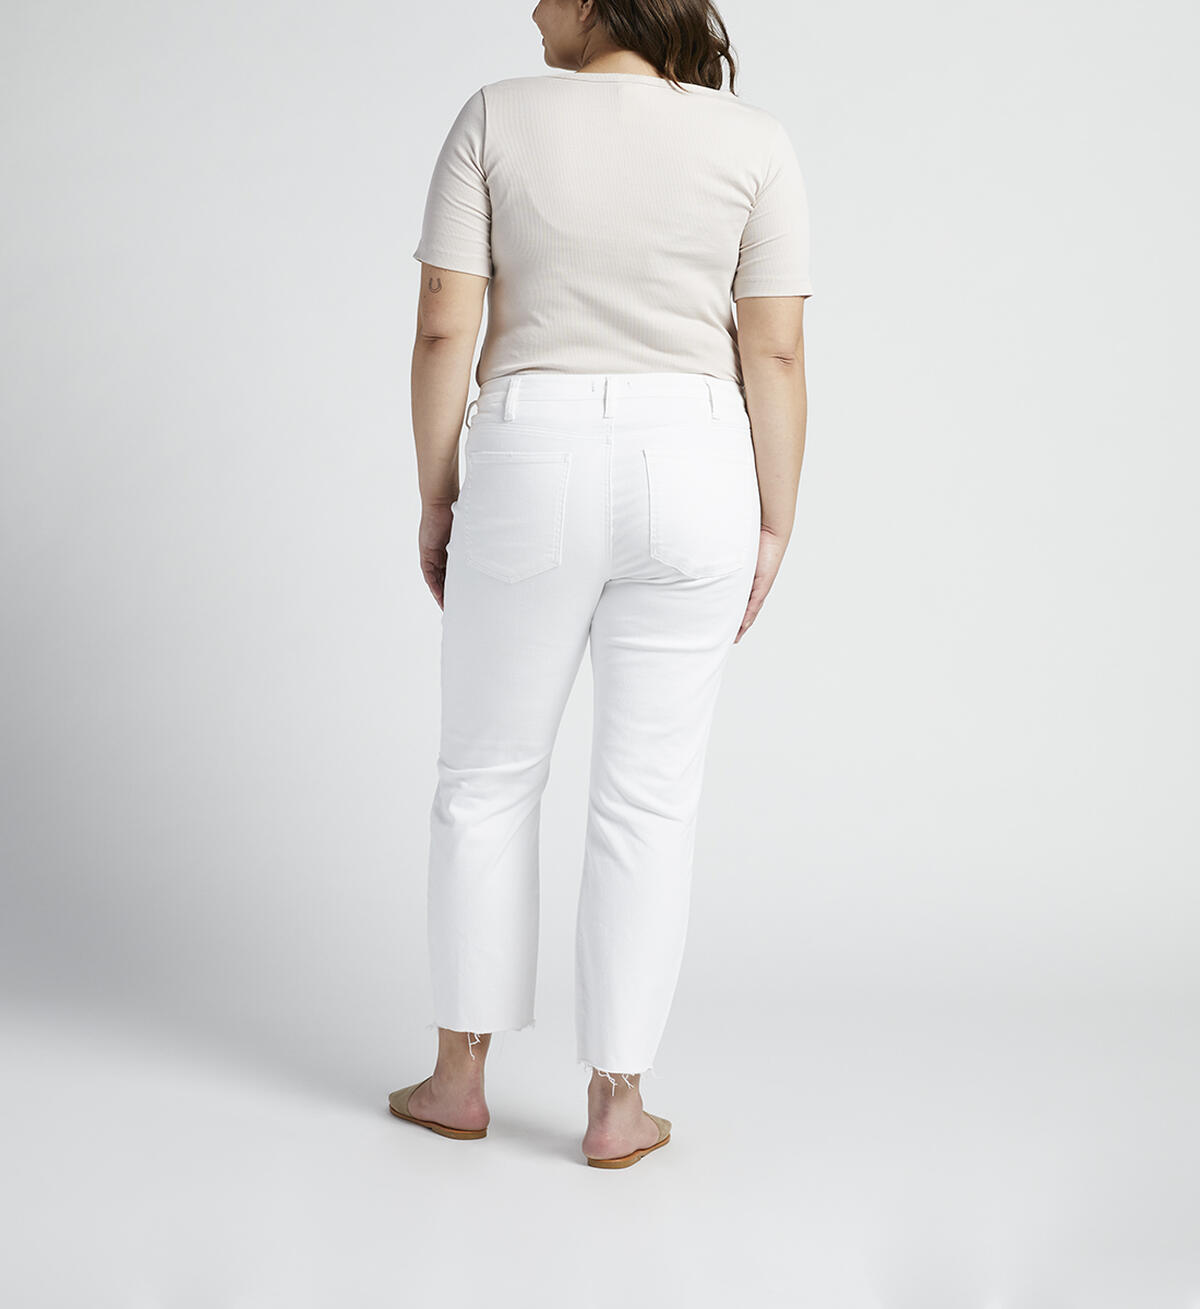 Most Wanted Mid Rise Straight Crop Pants Plus Size, , hi-res image number 1